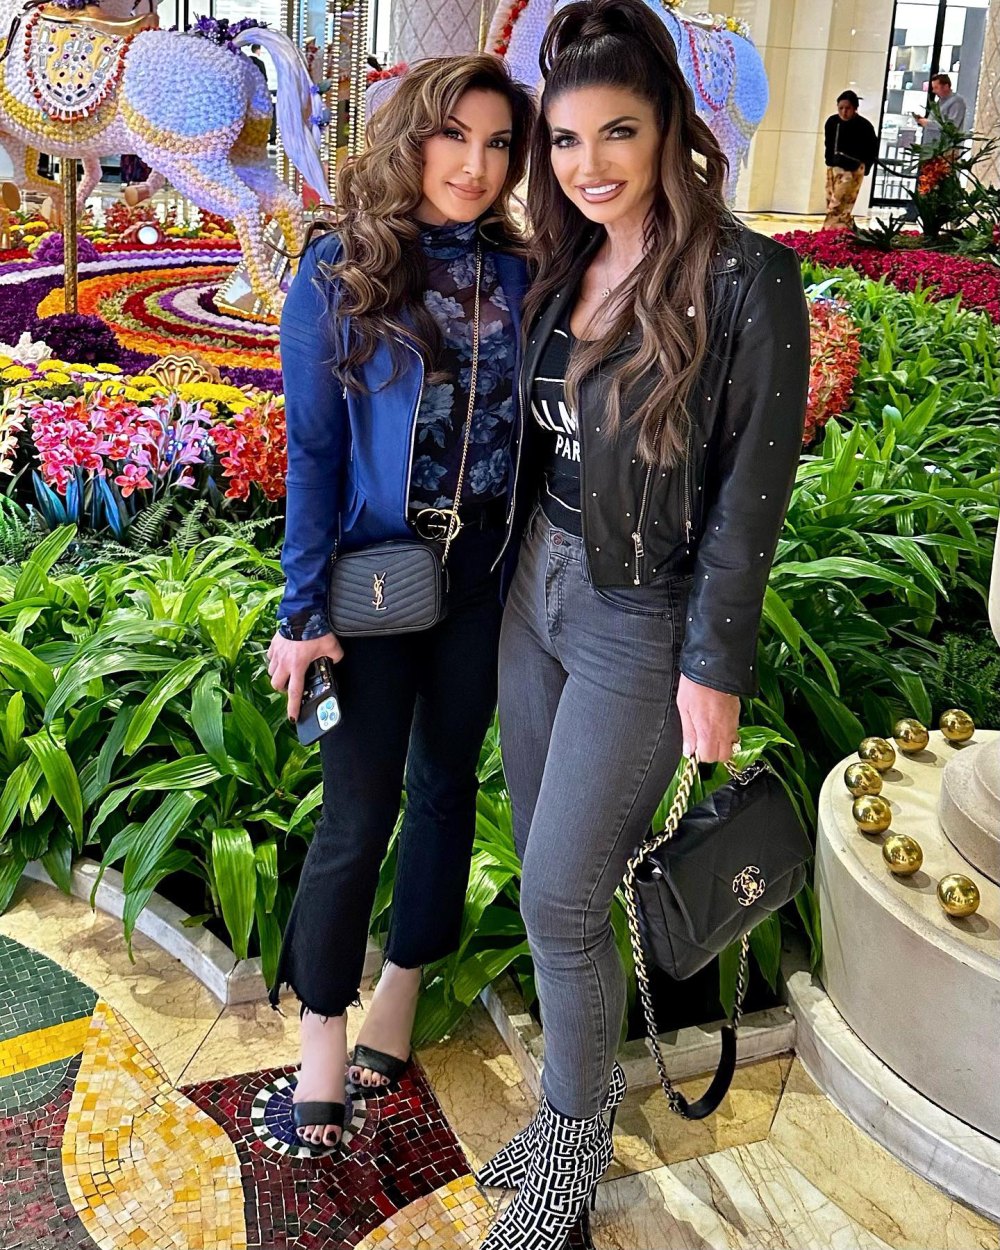 Teresa Giudice Reunites With Former 'RHONJ' Costar Jacqueline Laurita After Feud: We Had 'Lots to Talk About'